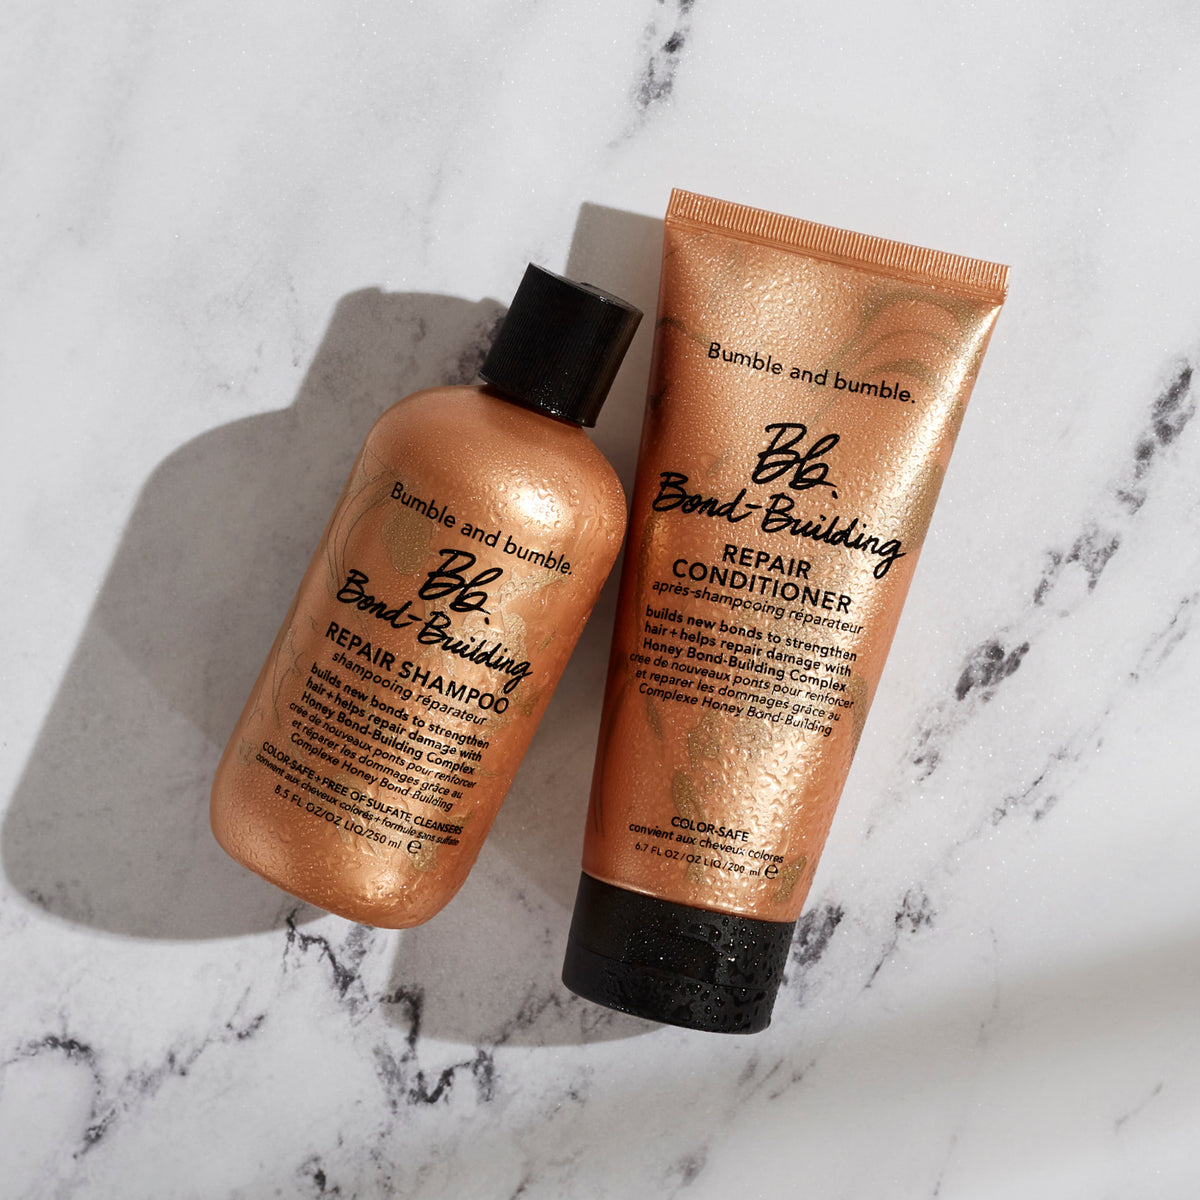 Bumble and Bumble Bond-Building Repair Conditioner .